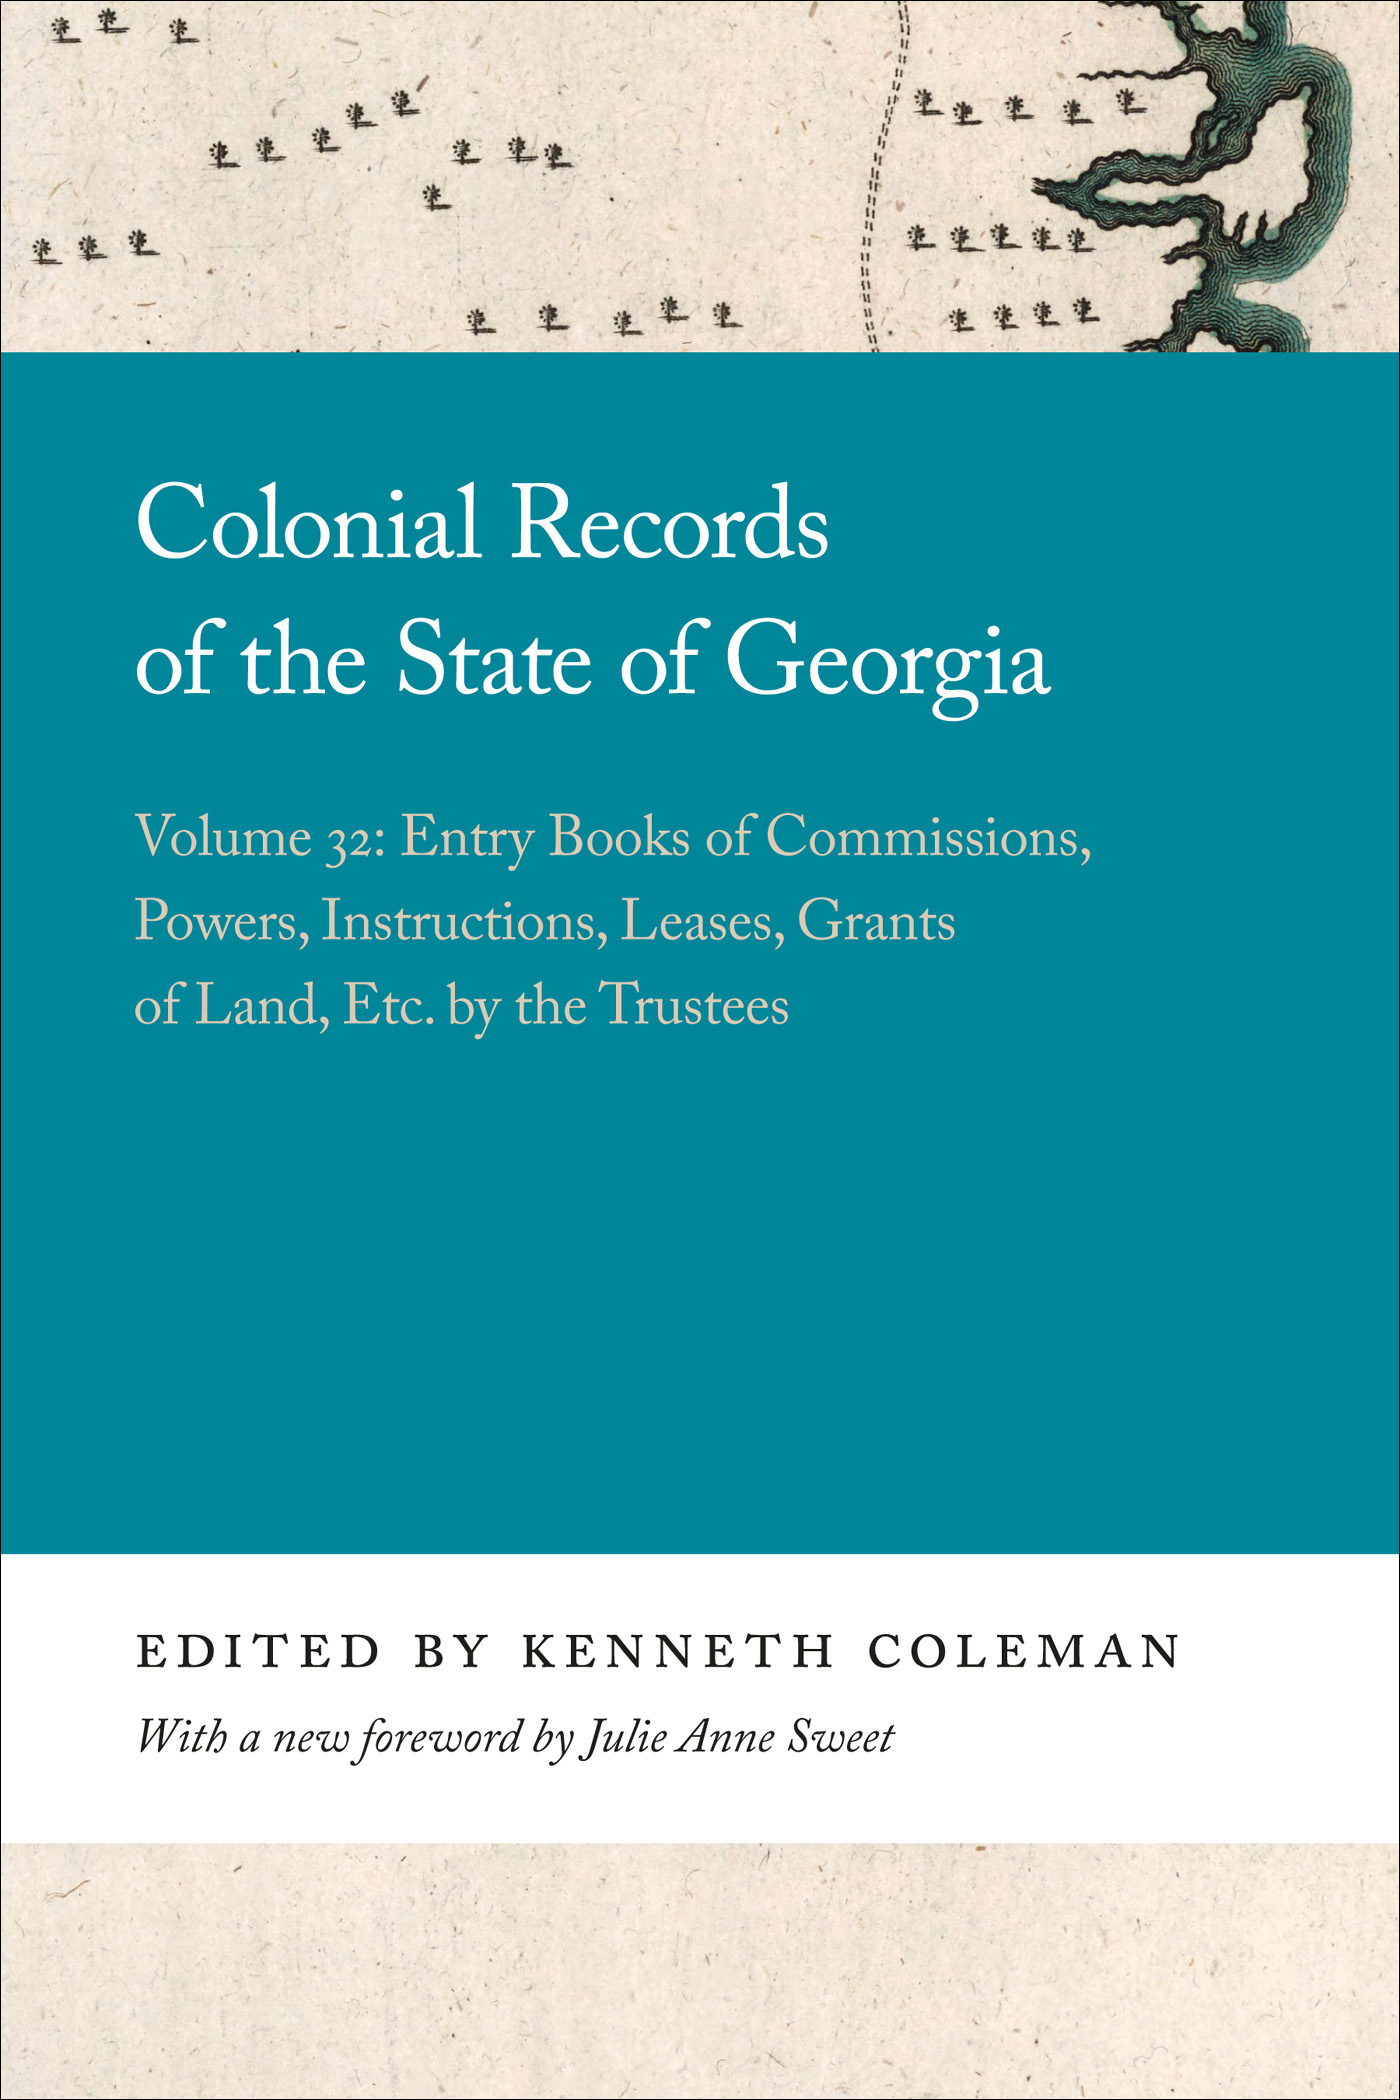 Cover of, Colonial records of the State of Georgia, volume 32 : Entry books of commissions, powers, instructions, leases, grants of land, etc. by the trustees.